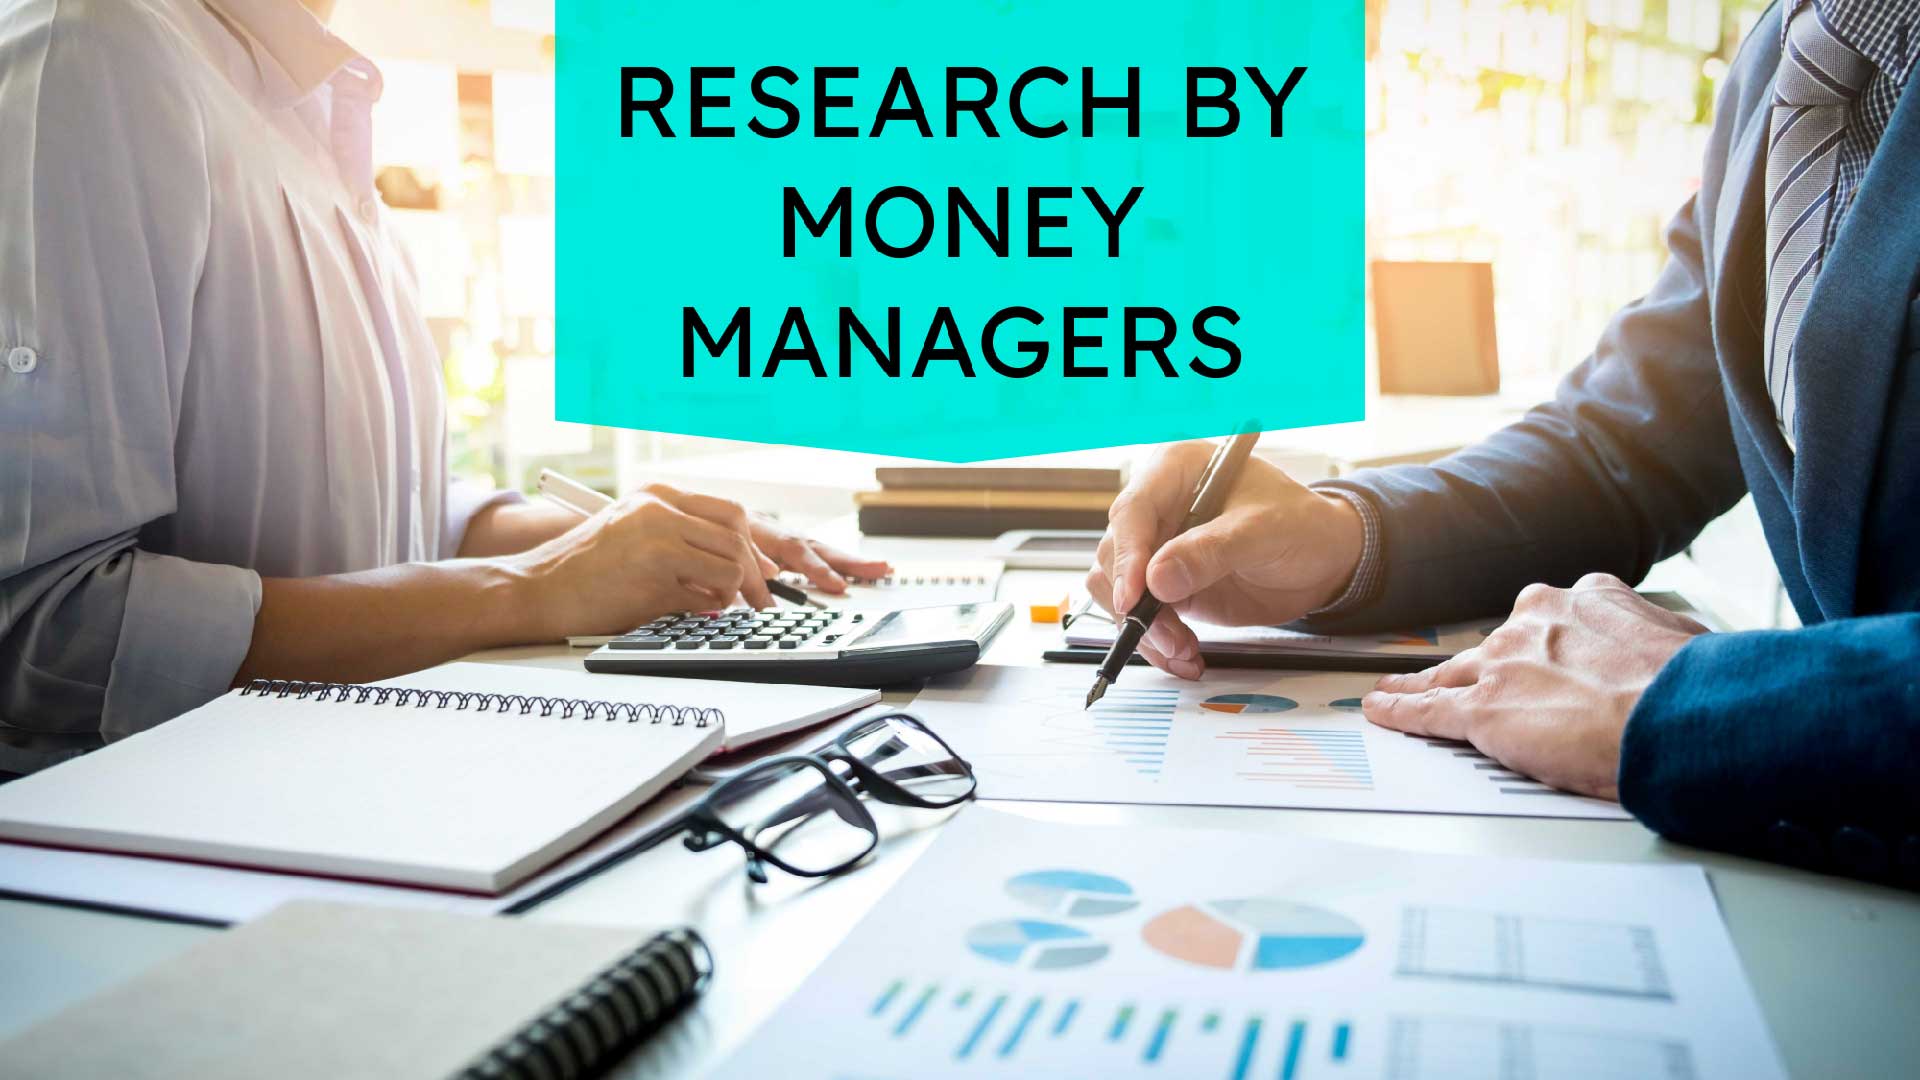 Research by Money Managers(Potomac)